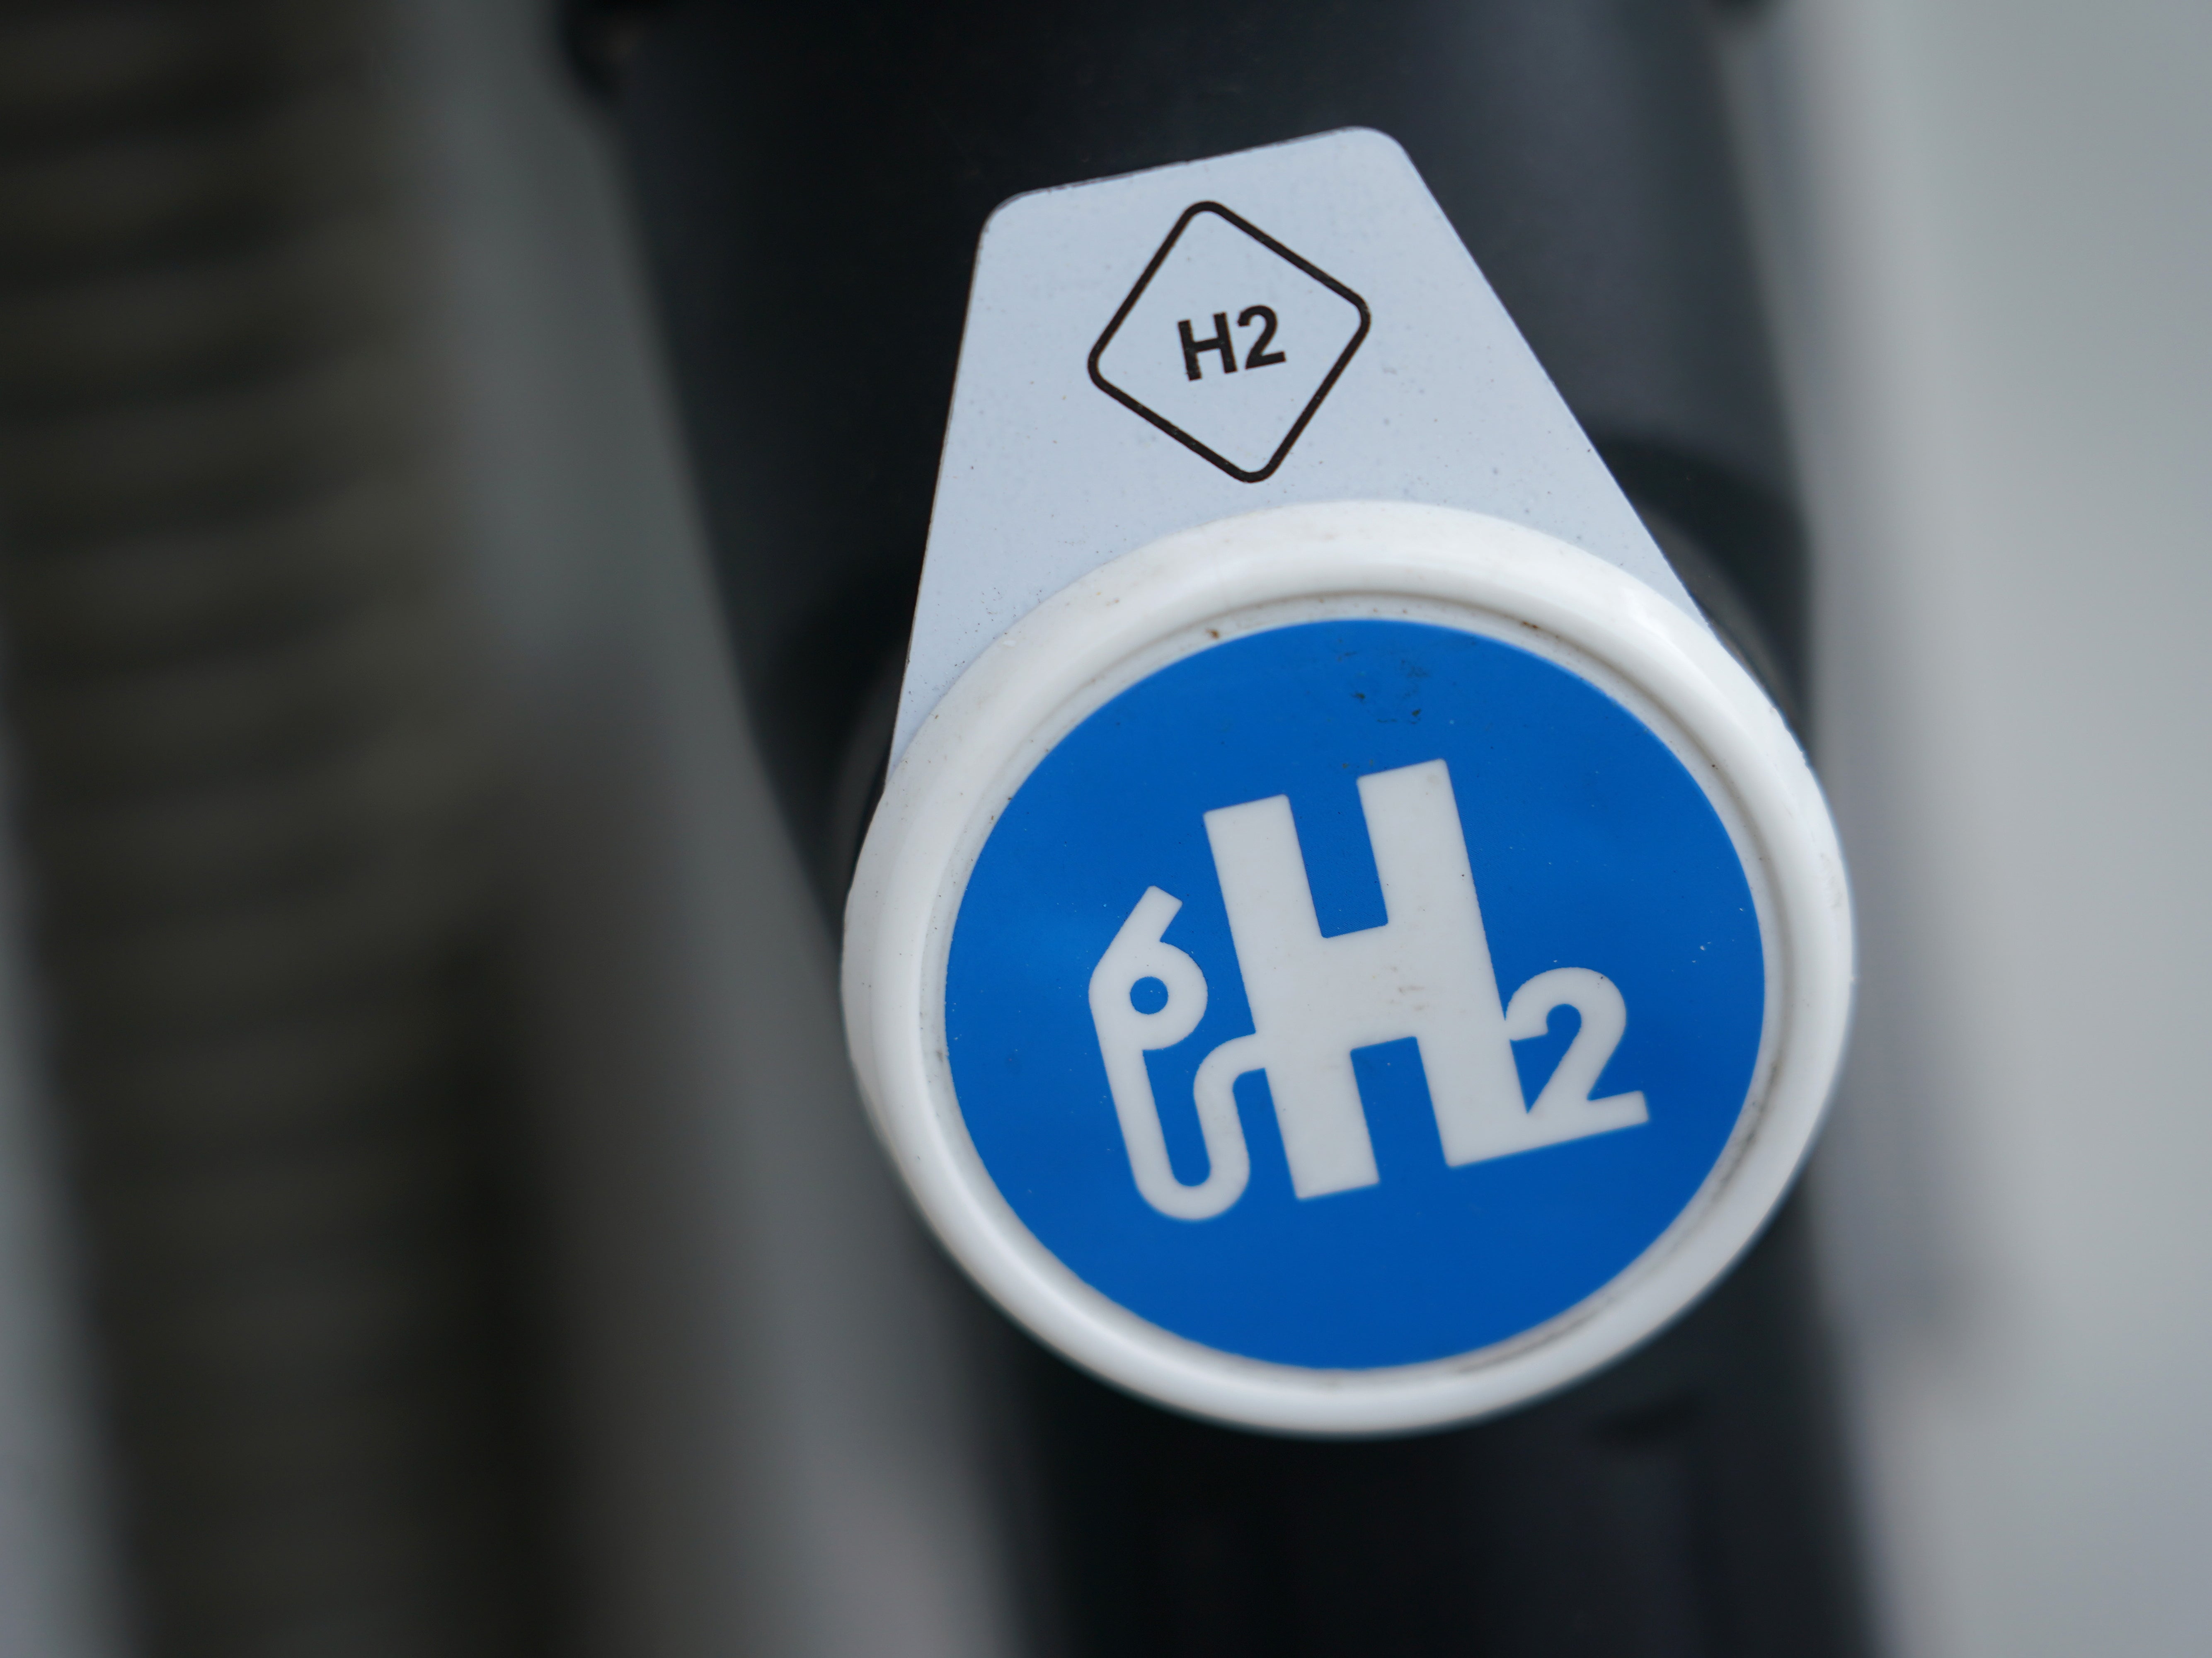 Britain is falling behind both the EU and US in the hydrogen industry